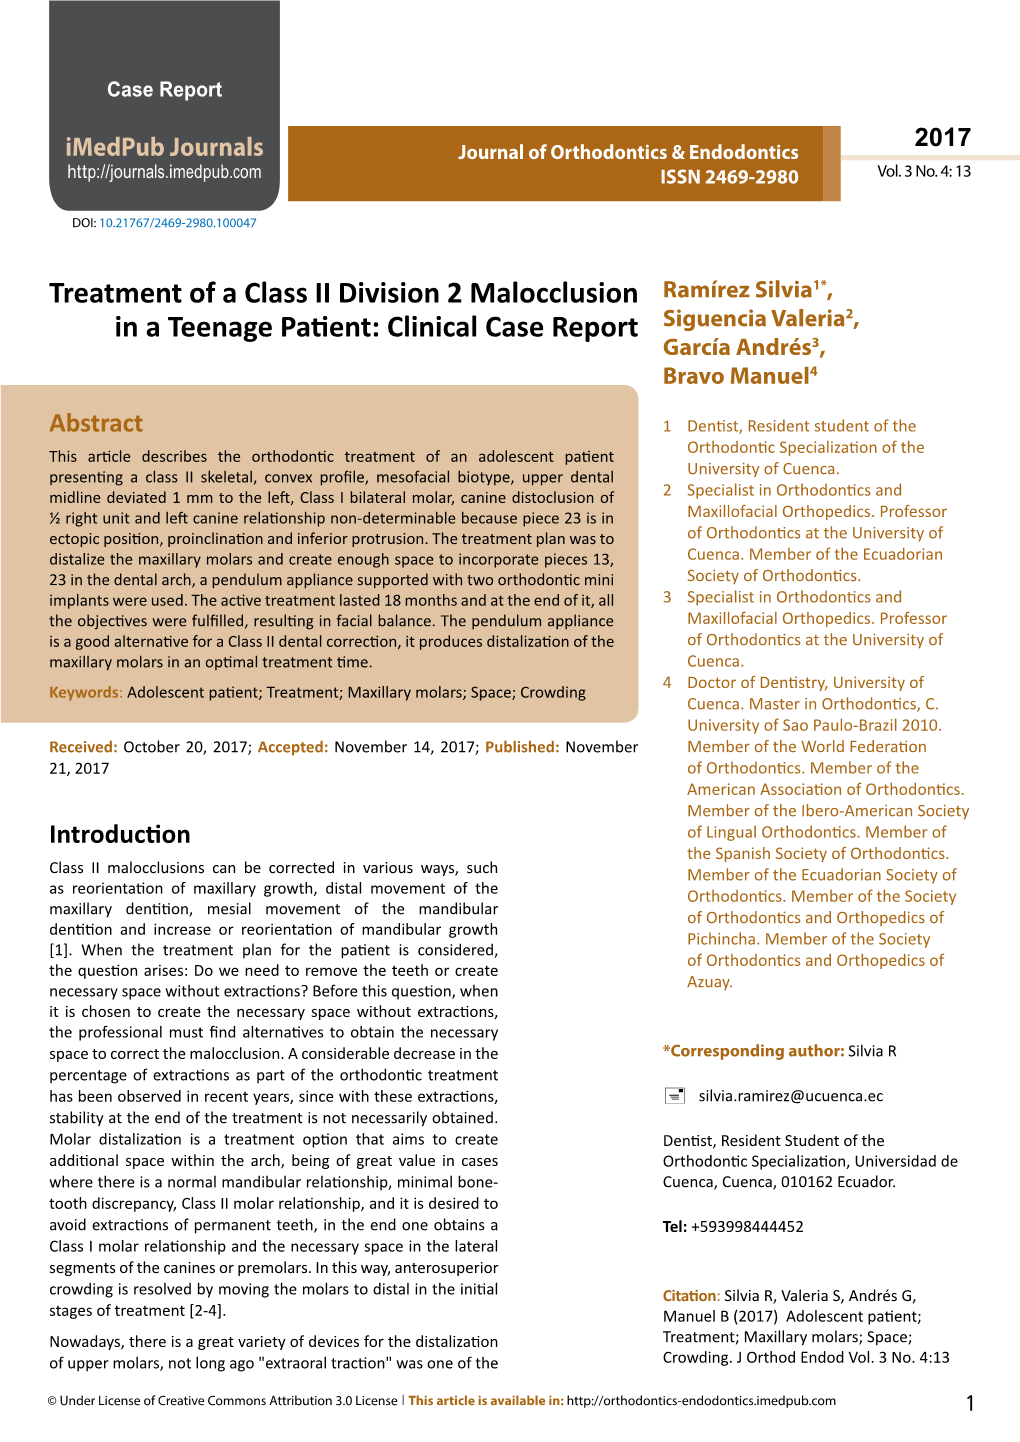 Treatment of a Class II Division 2 Malocclusion in a Teenage Patient